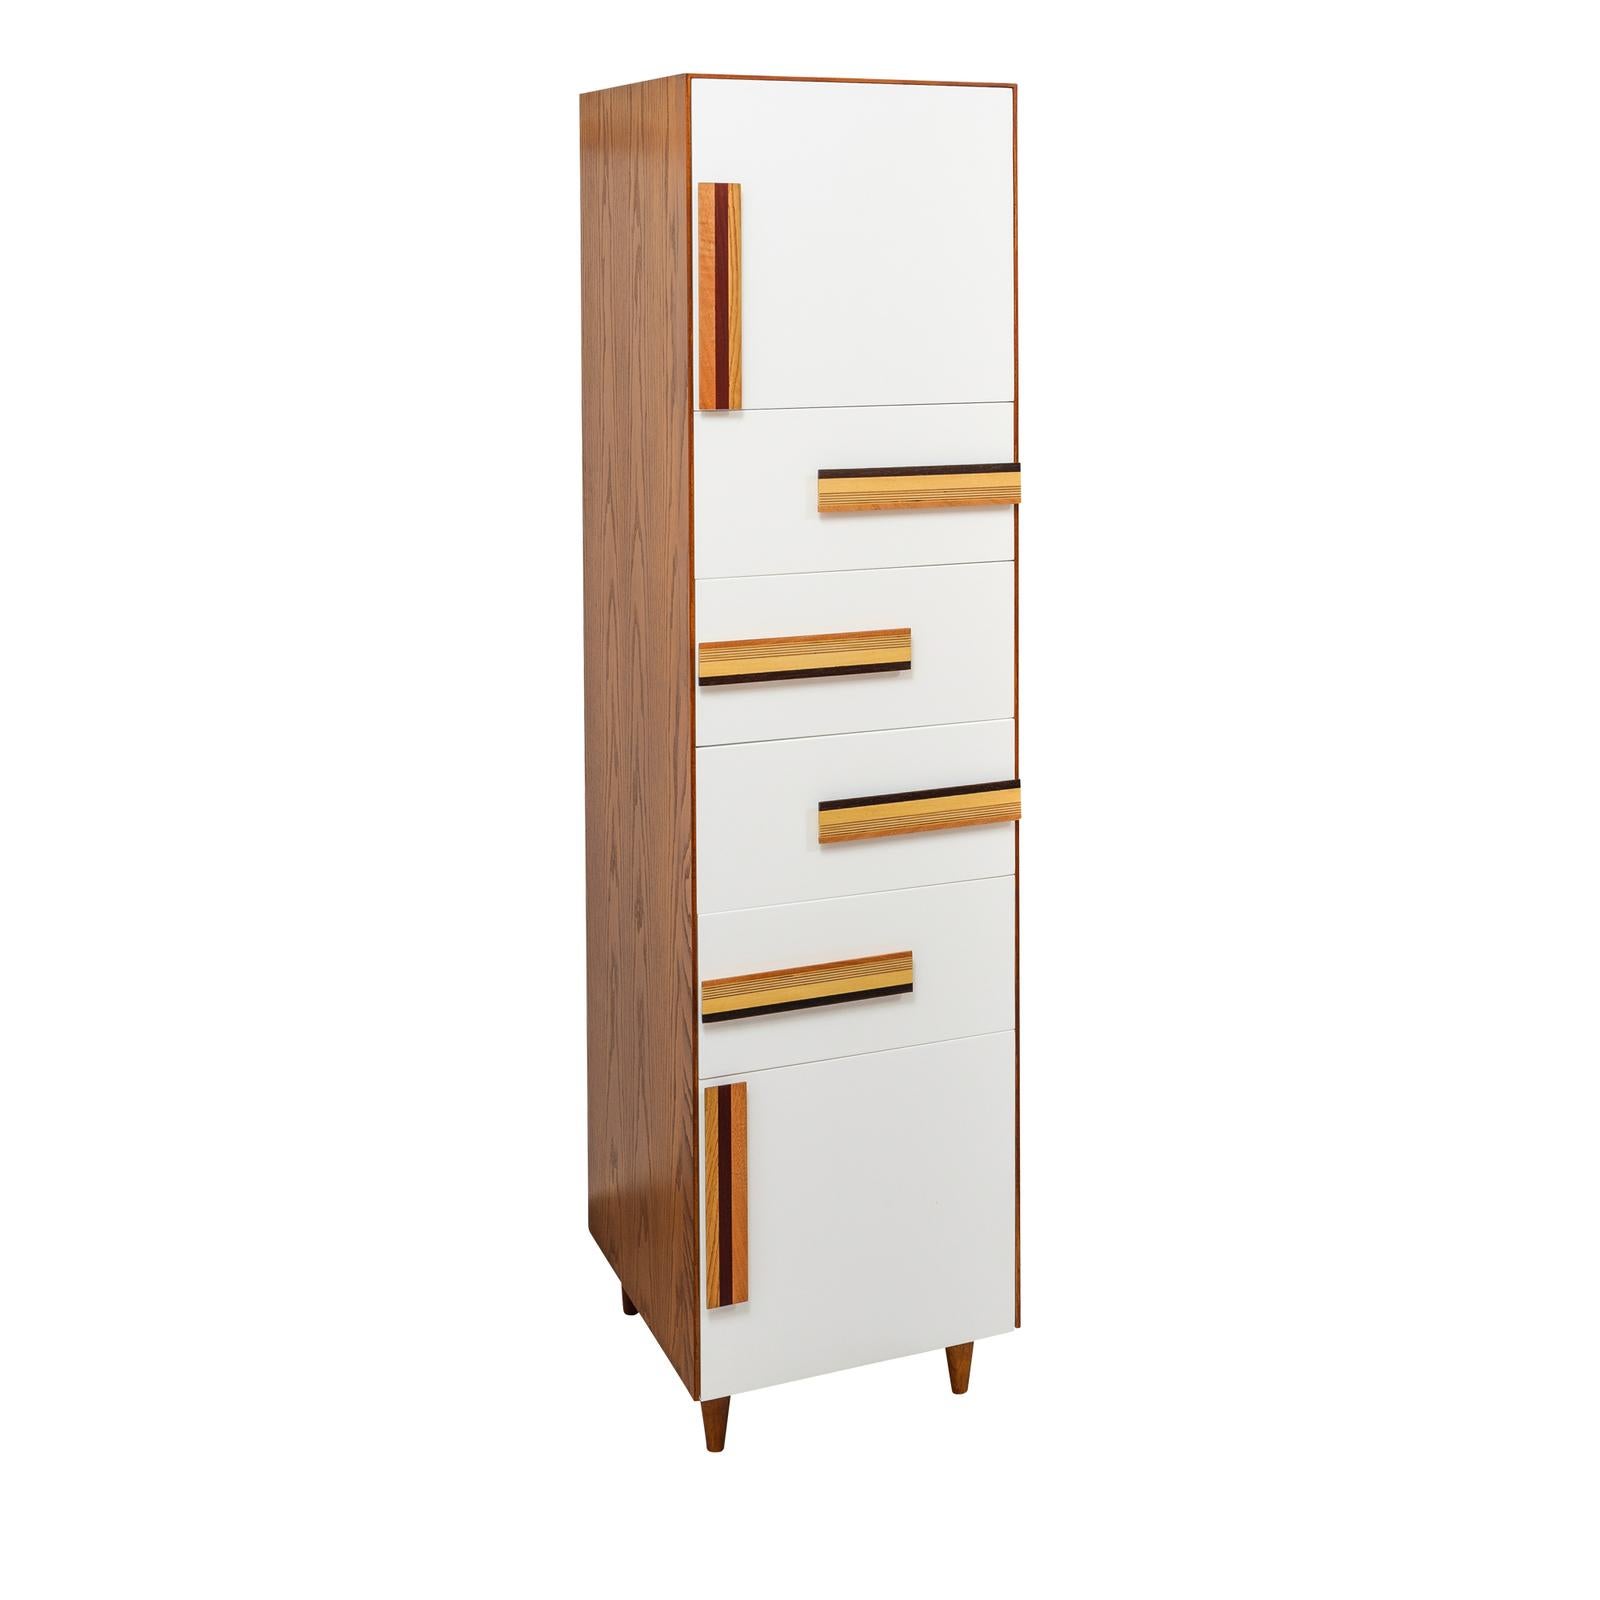 Modern Waite on Cabinet by Tropica Design